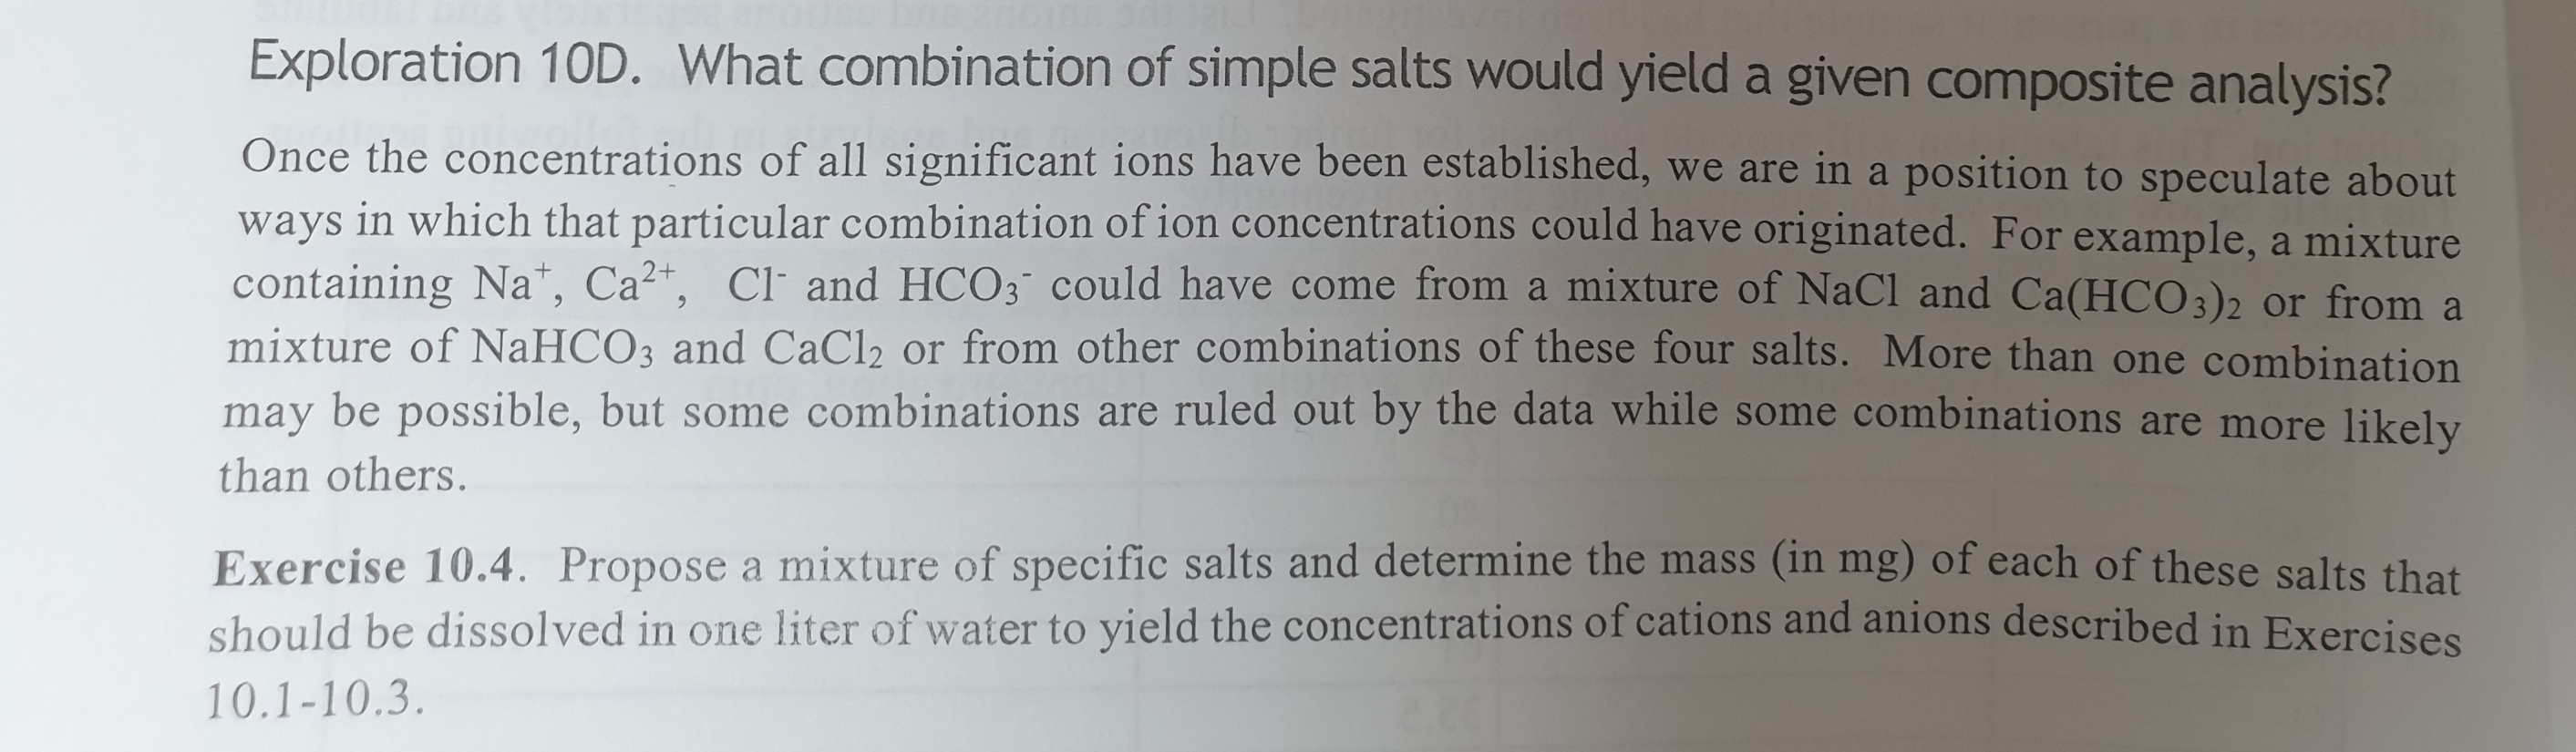 Exploration 10D. What combination of simple salts would yield a given composite analysis?
Once the concentrations of all significant ions have been established, we are in a position to speculate about
ways in which that particular combination of ion concentrations could have originated. For example, a mixture
containing Na*, Ca²*, Cl and HCO3 could have come from a mixture of NaCl and Ca(HCO3)2 or from a
mixture of NAHCO3 and CaCl2 or from other combinations of these four salts. More than one combination
may be possible, but some combinations are ruled out by the data while some combinations are more likelv
than others.
Exercise 10.4. Propose a mixture of specific salts and determine the mass (in mg) of each of these salts that
should be dissolved in one liter of water to yield the concentrations of cations and anions described in Exercises
10.1-10.3.
